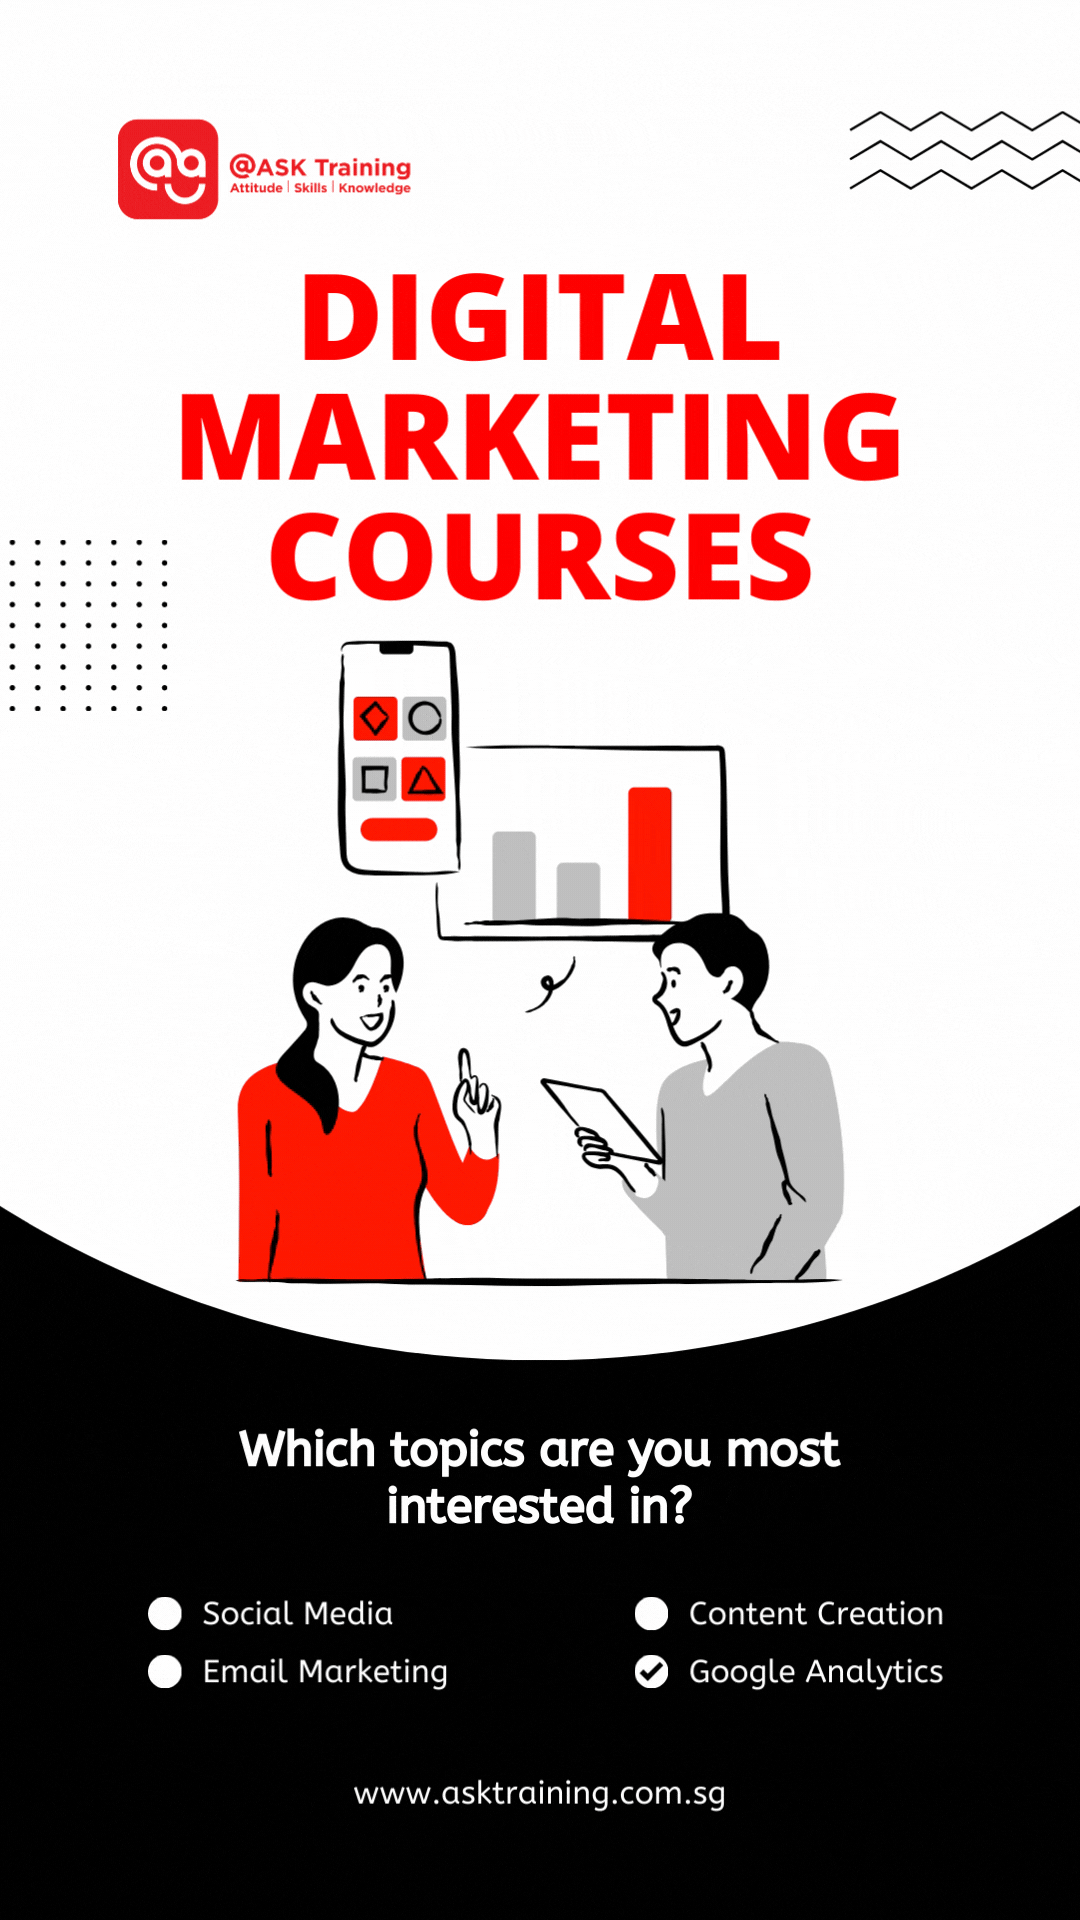 ASK Training email marketing quiz example